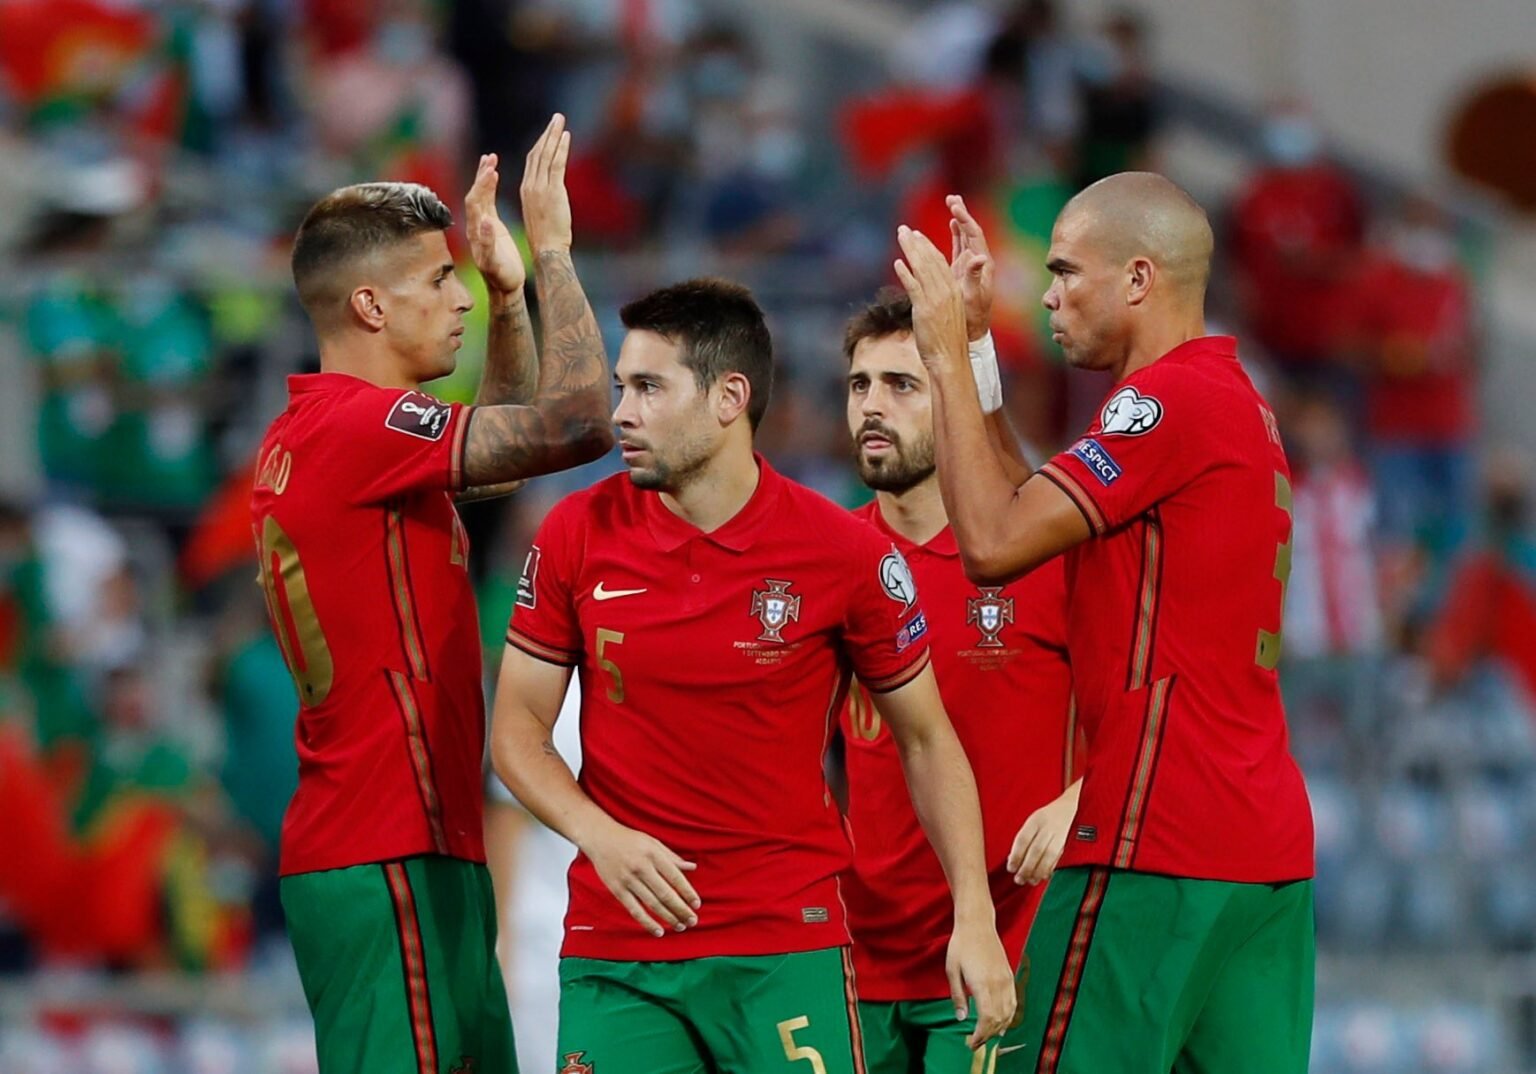 Portugal vs Switzerland Live Stream free? How to watch live!